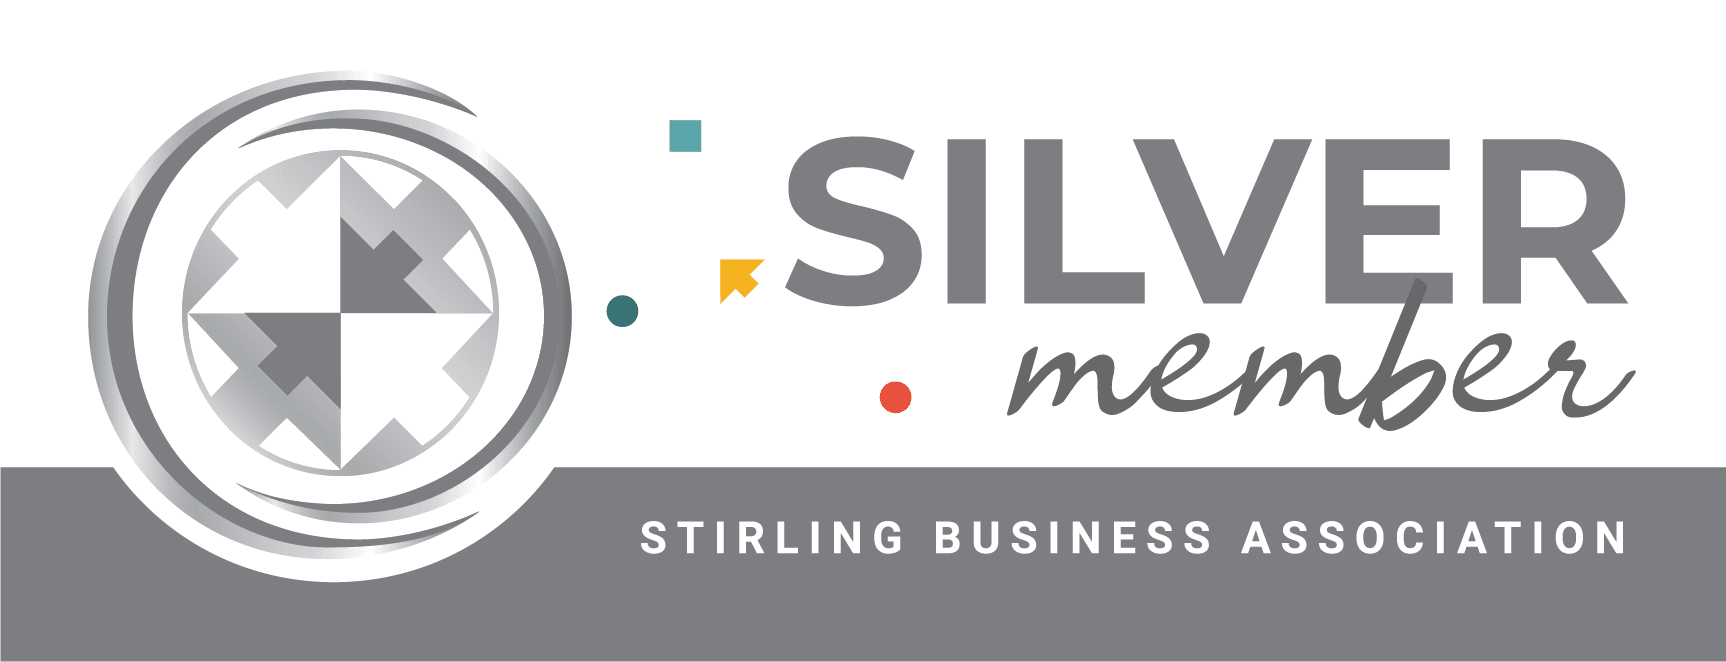 A silver member logo for the stirling business association